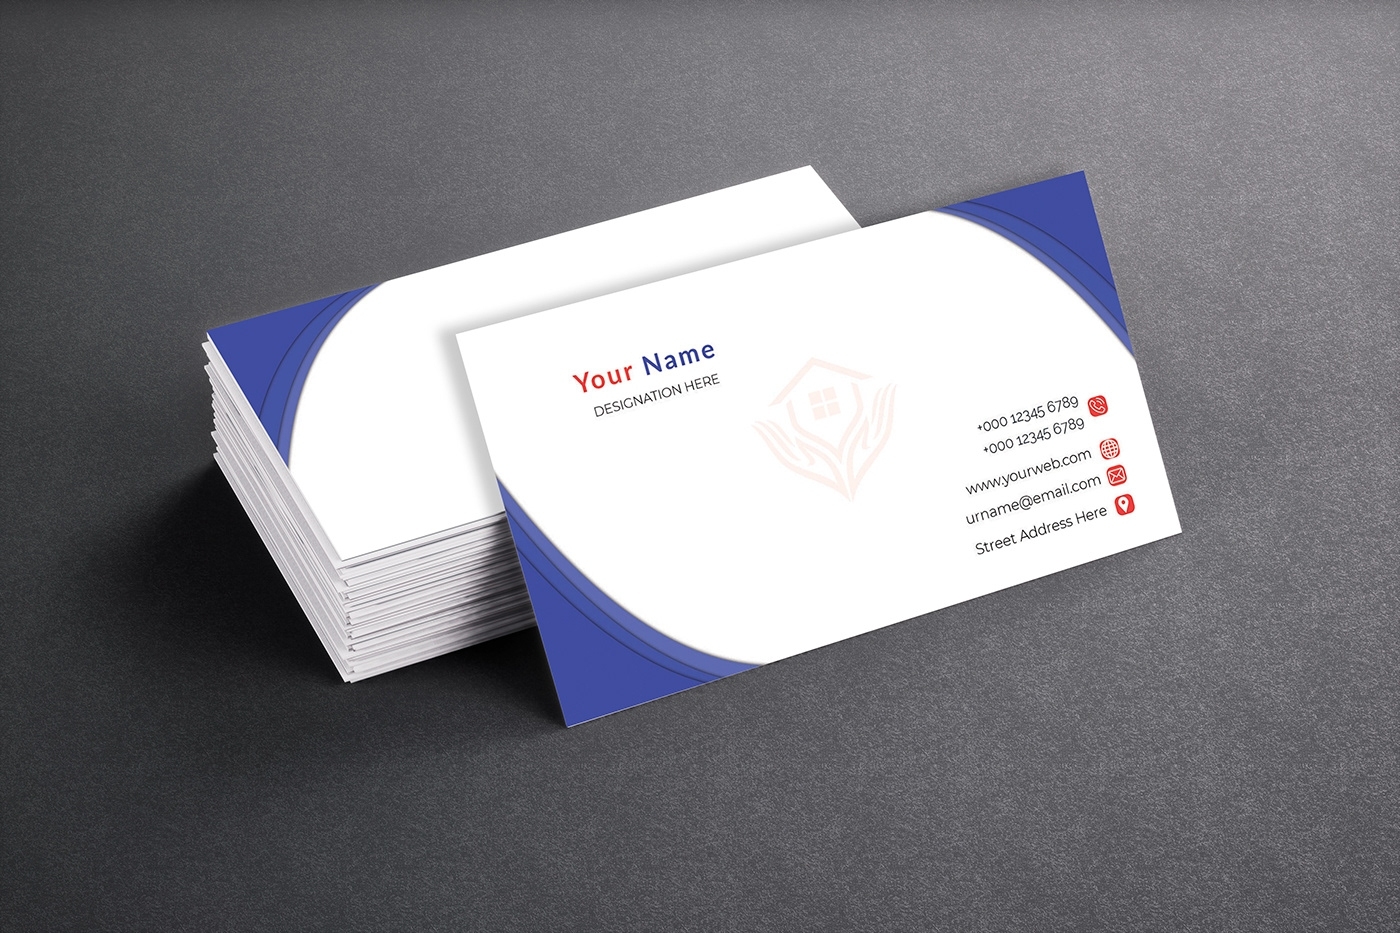 Print Business Card - Free Business Card Template Psd For Print - Free intended for Free Template Business Cards To Print